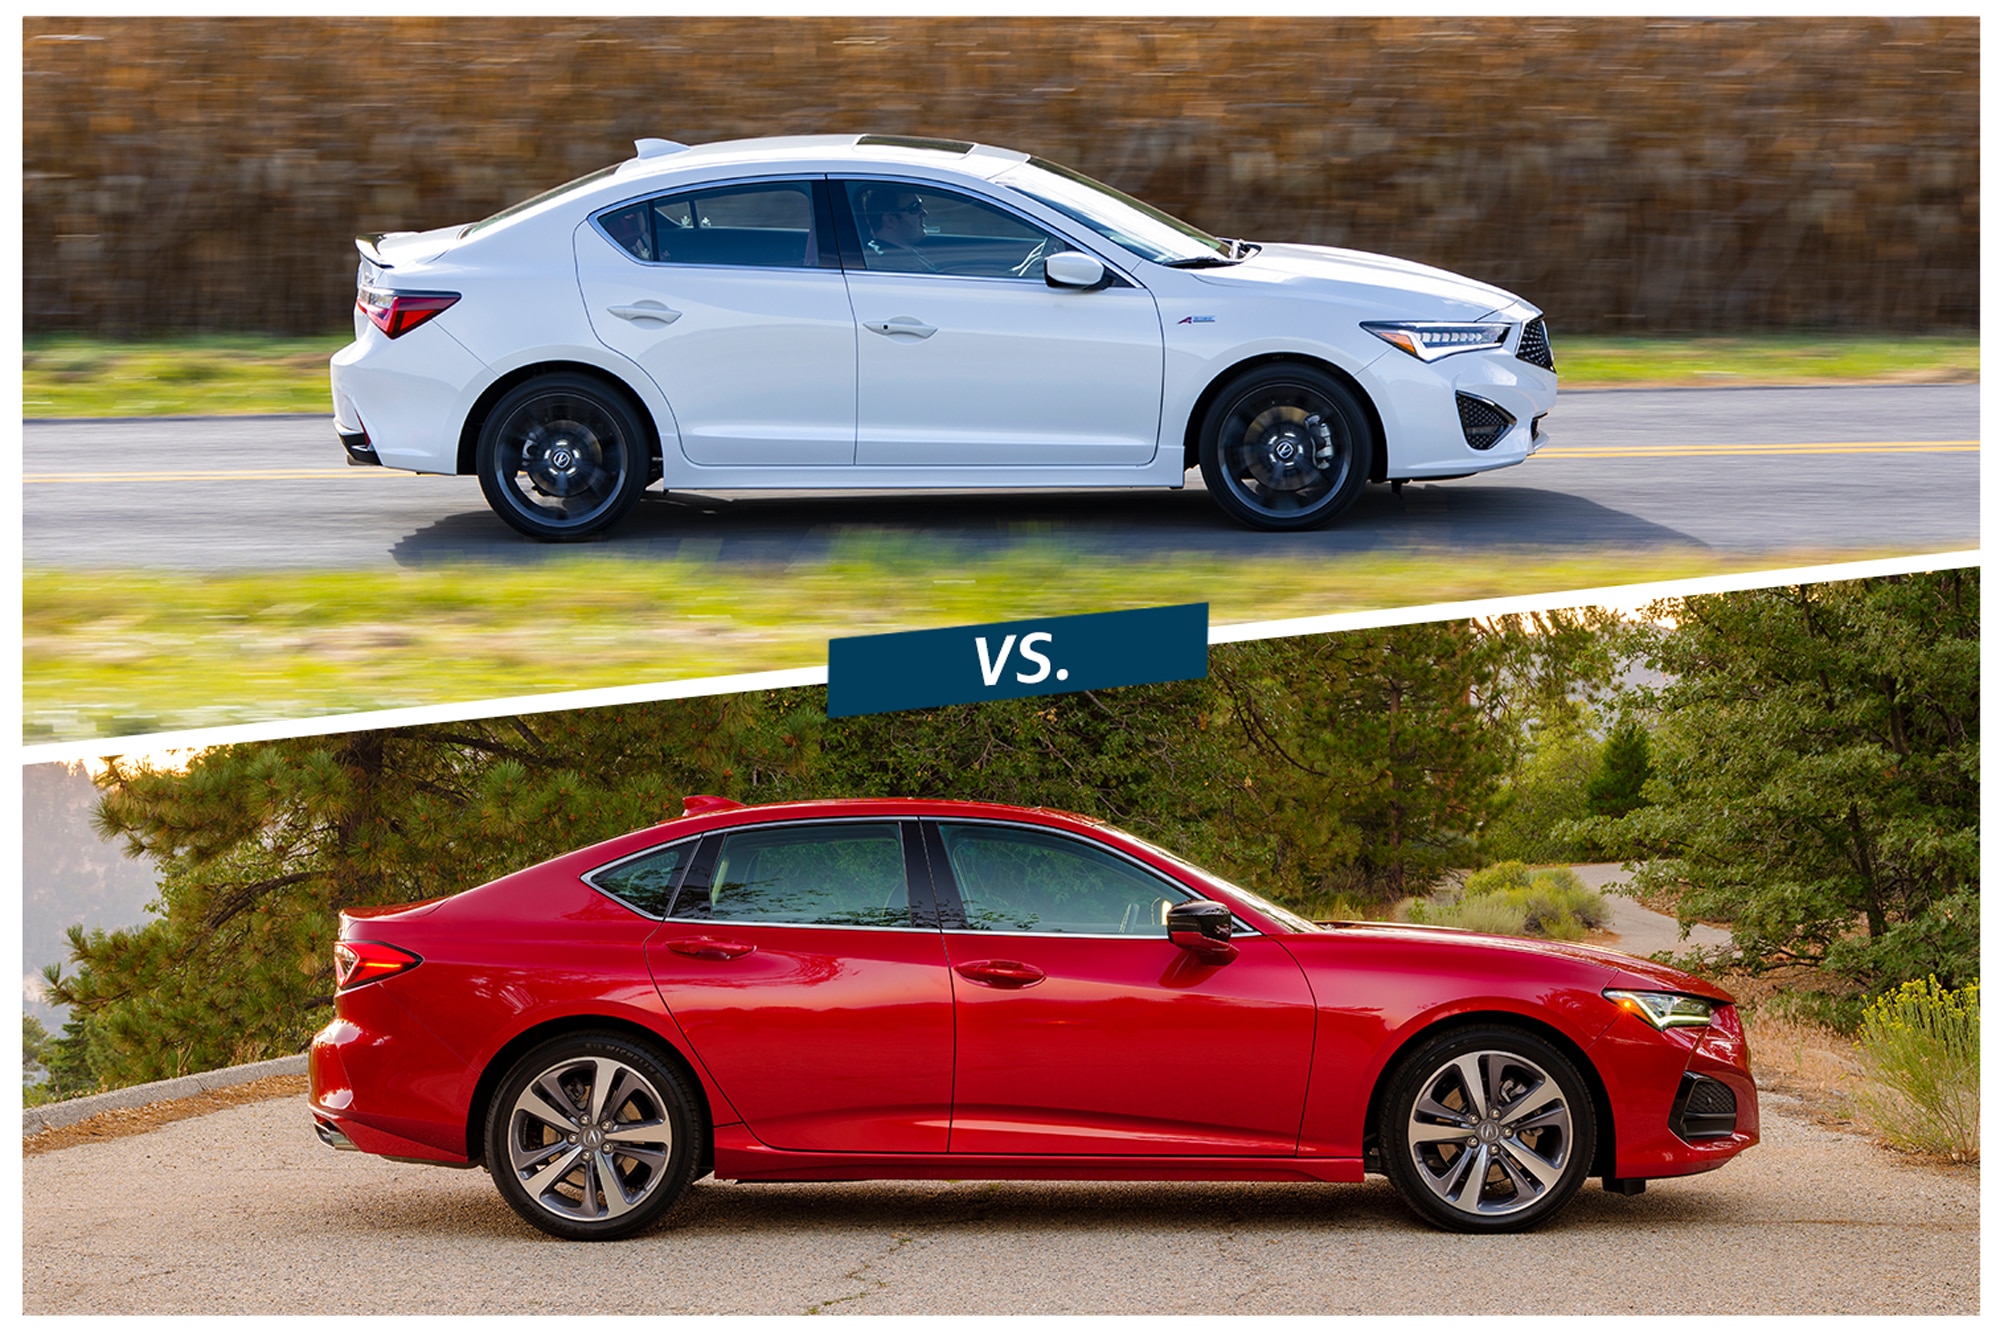 Acura ILX and Acura TLX compared against each other